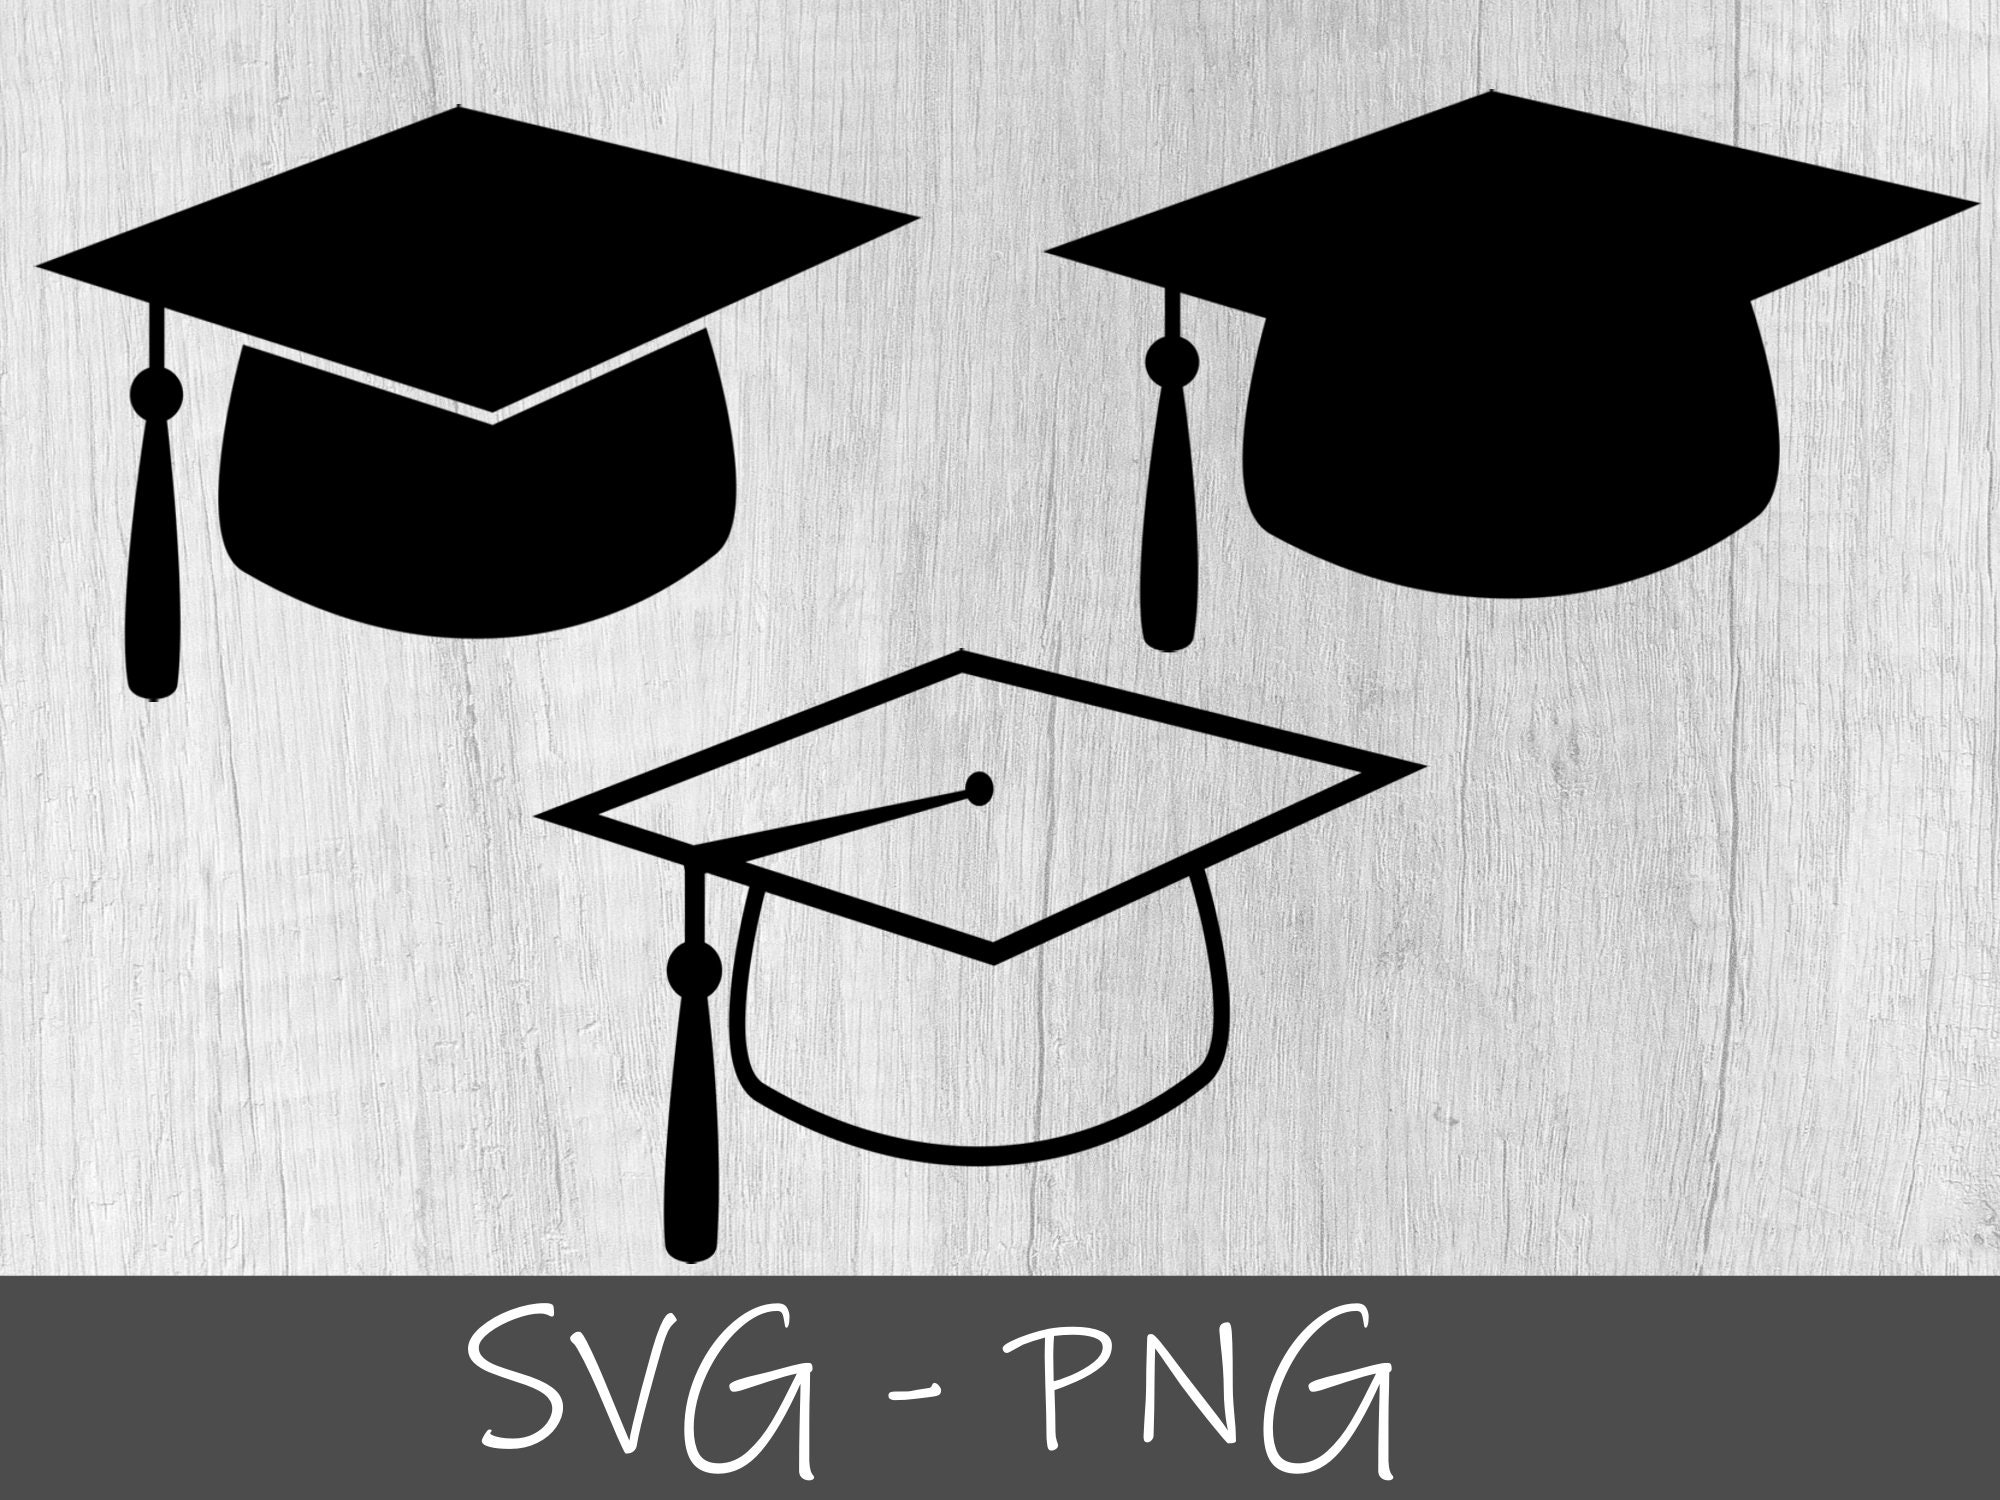 degree cap clipart front and back